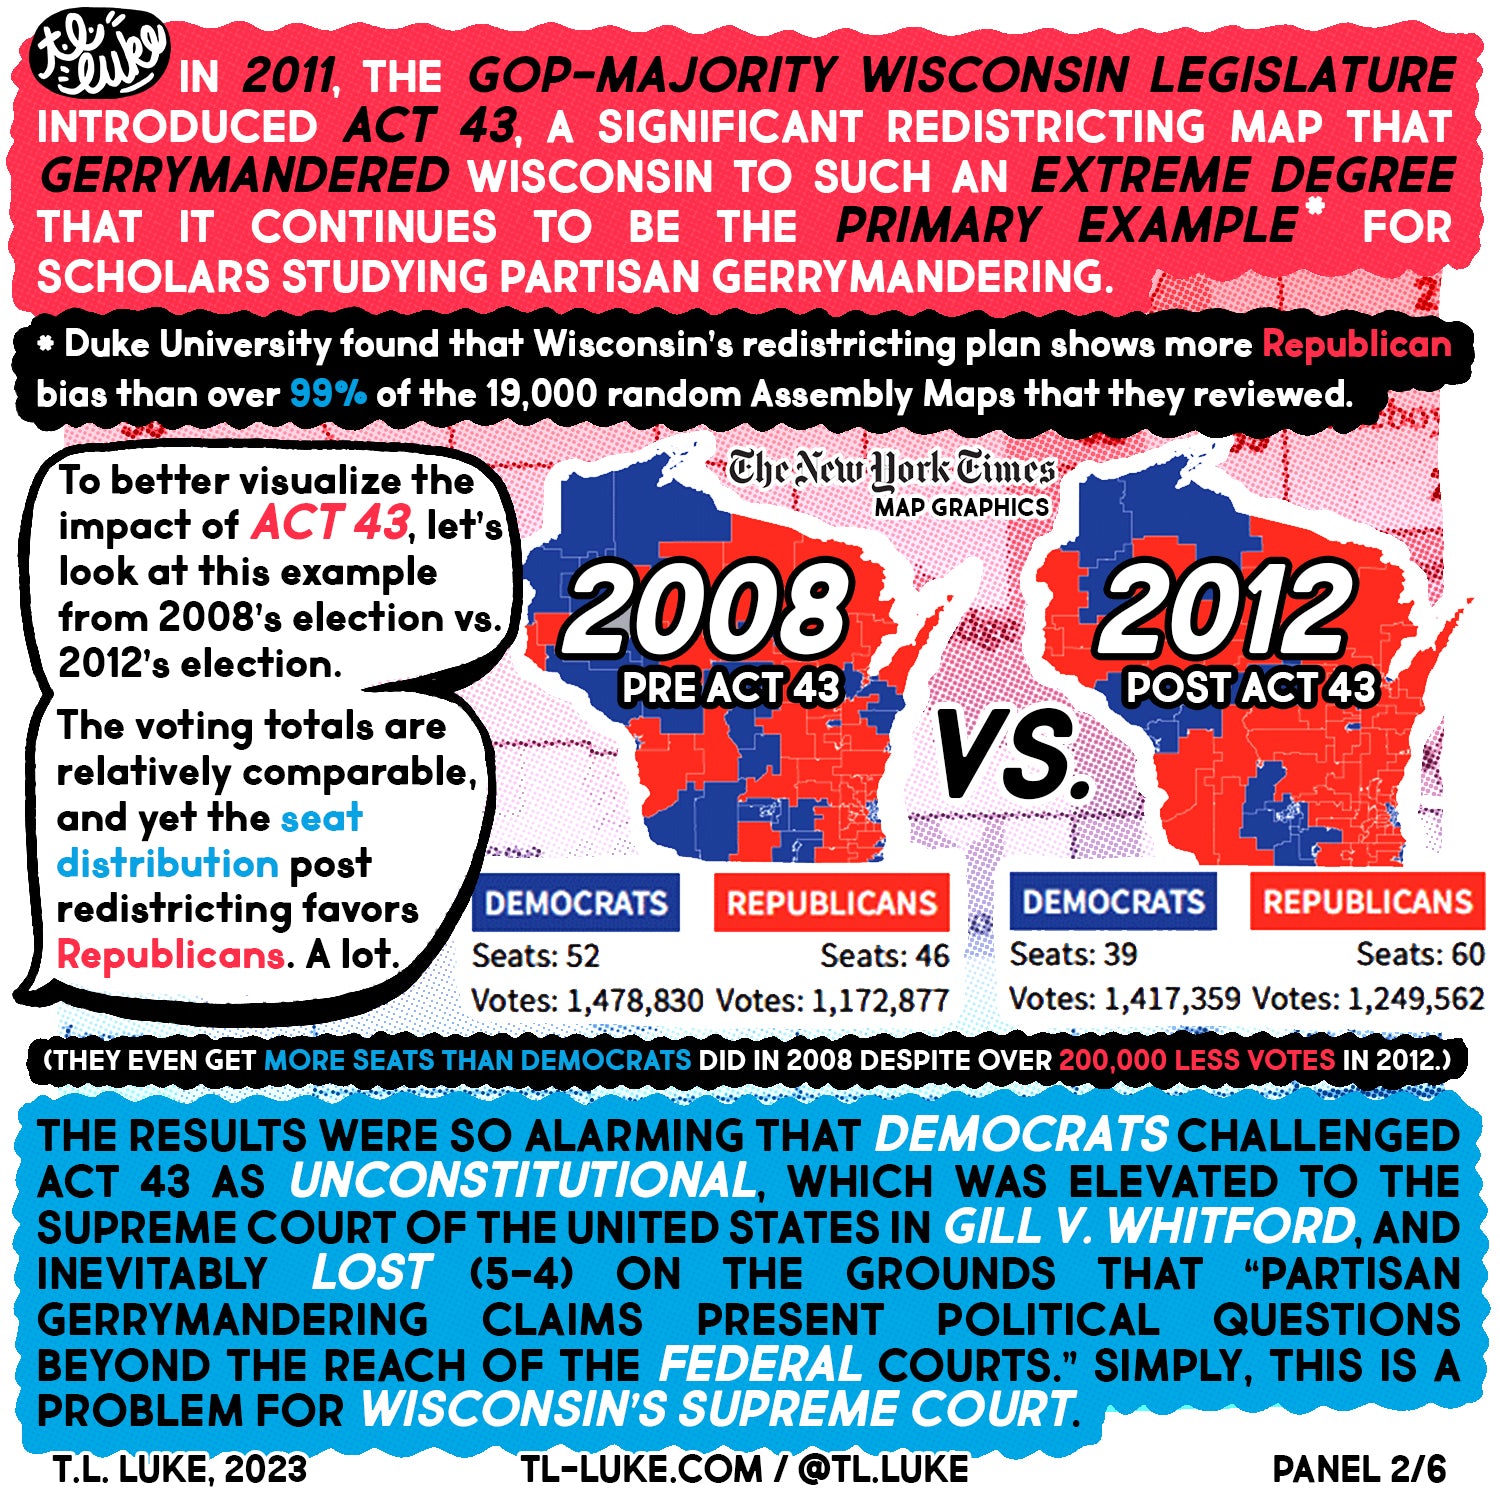 Panel 2/6 of the comic “Daniel Kelly & Map Redistricting” by T.L. Luke. This one shows graphs comparing Wisconsin’s district maps from 2008 and 2012.